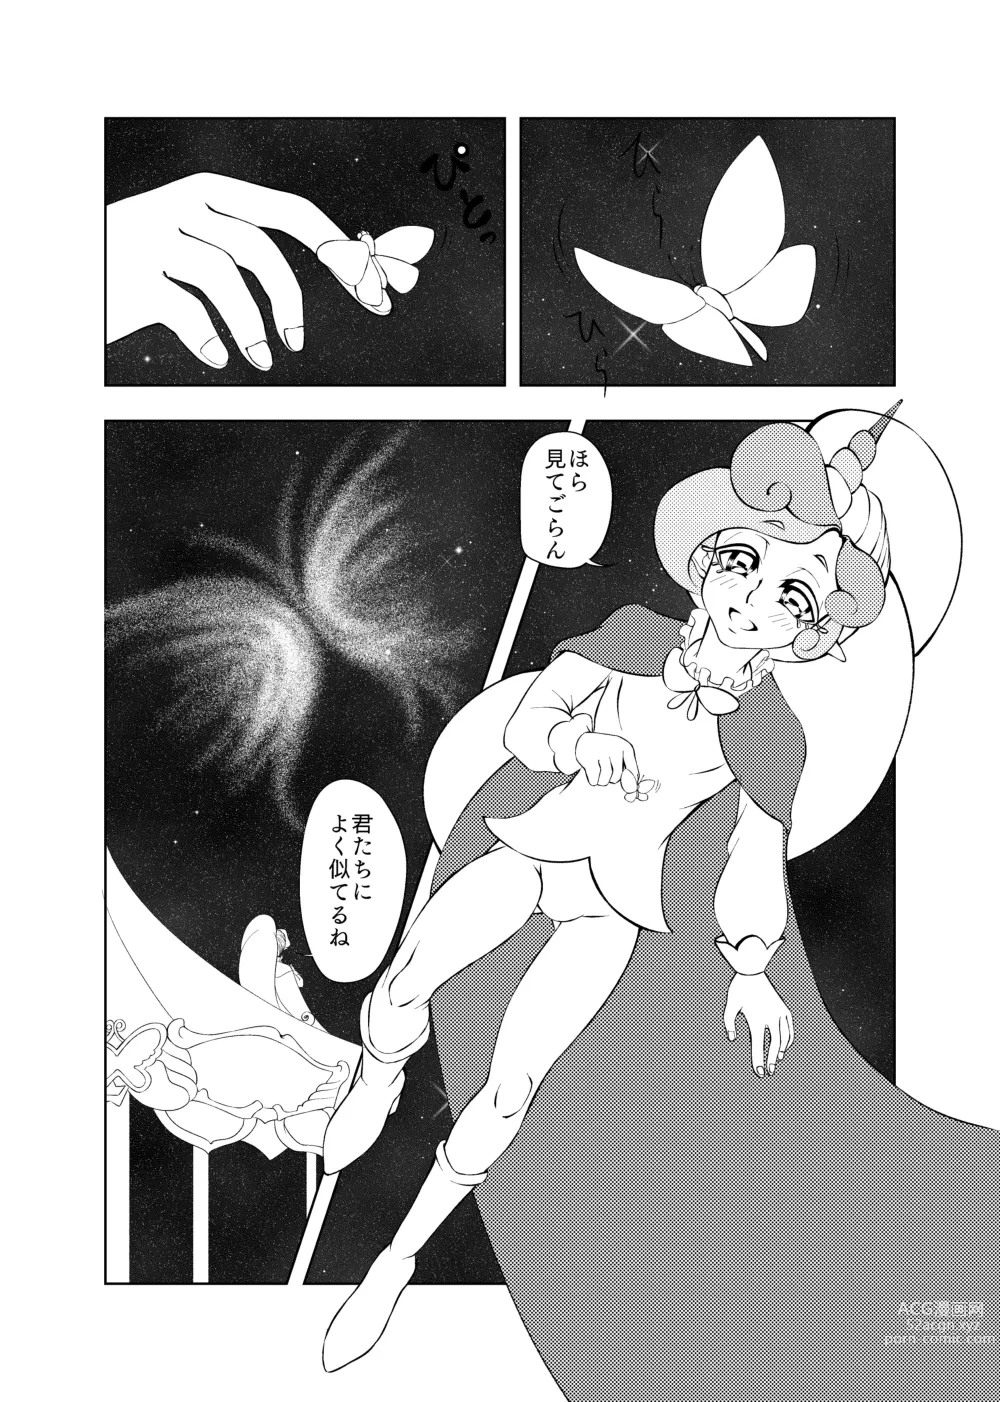 Page 2 of doujinshi Butterfly nebula ｰmirror houseｰ